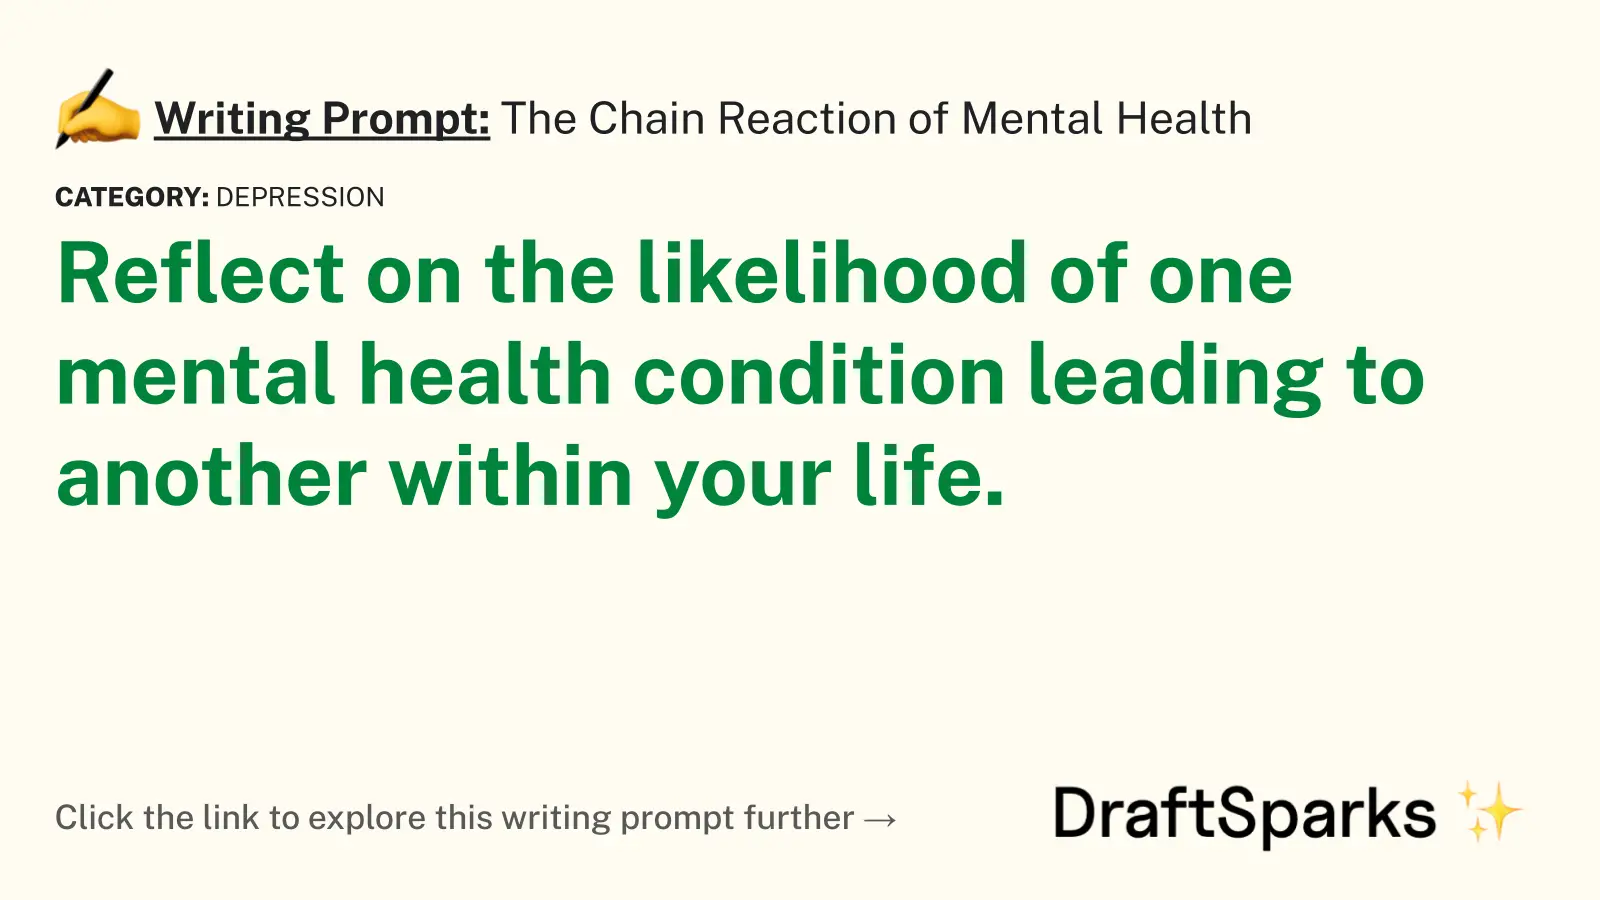 The Chain Reaction of Mental Health